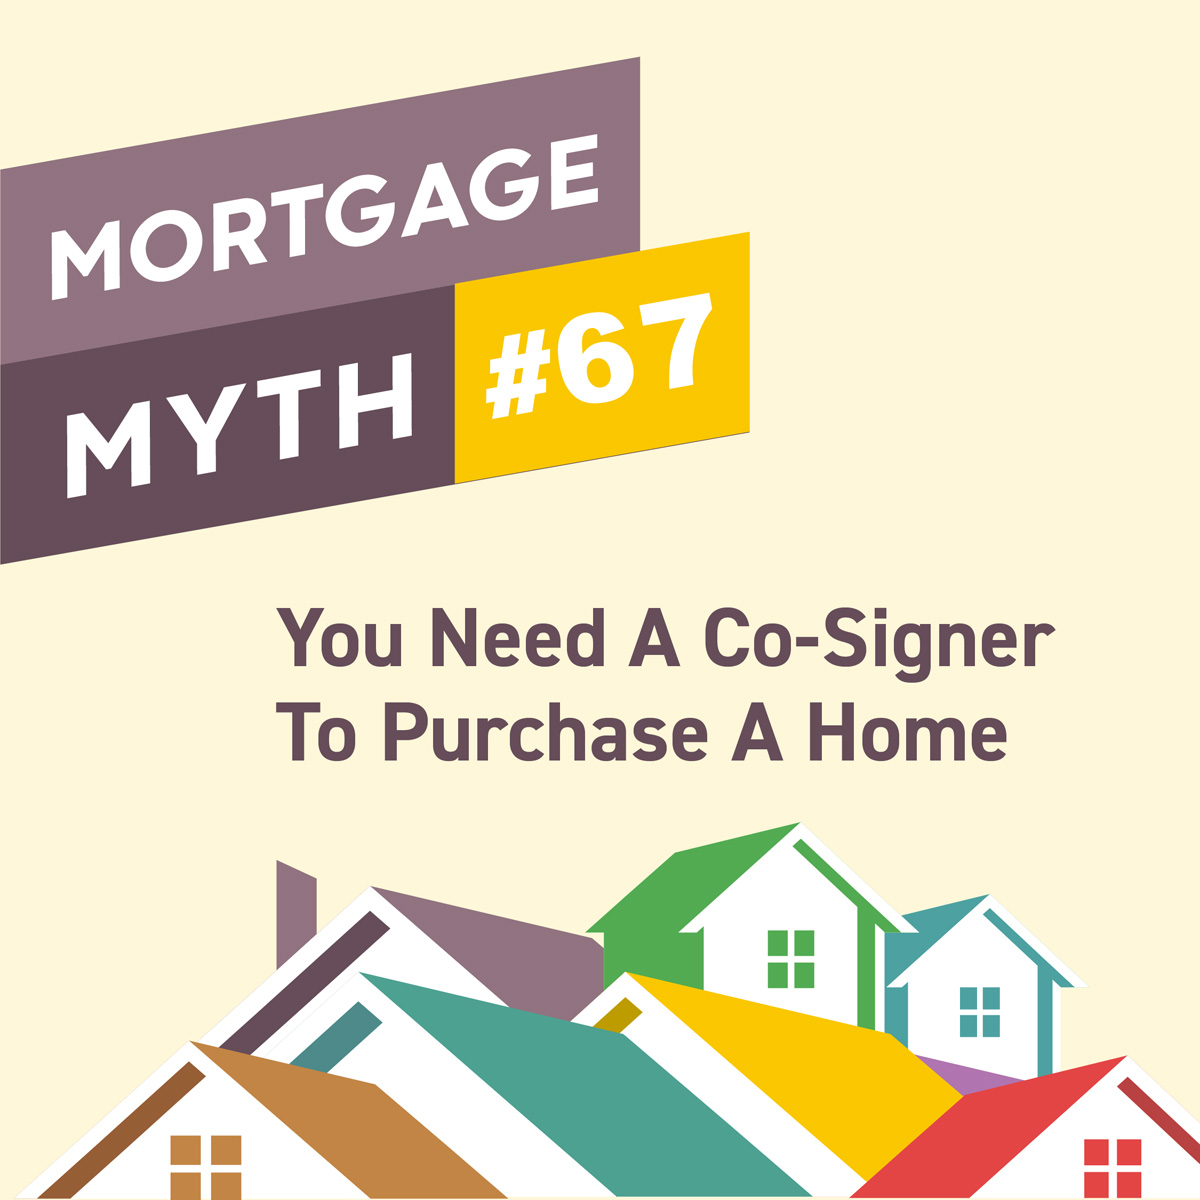 You don't always need a co-signer to purchase a home! If your credit stands on its own, you can qualify to be the sole name on the mortgage. Call today to learn more.